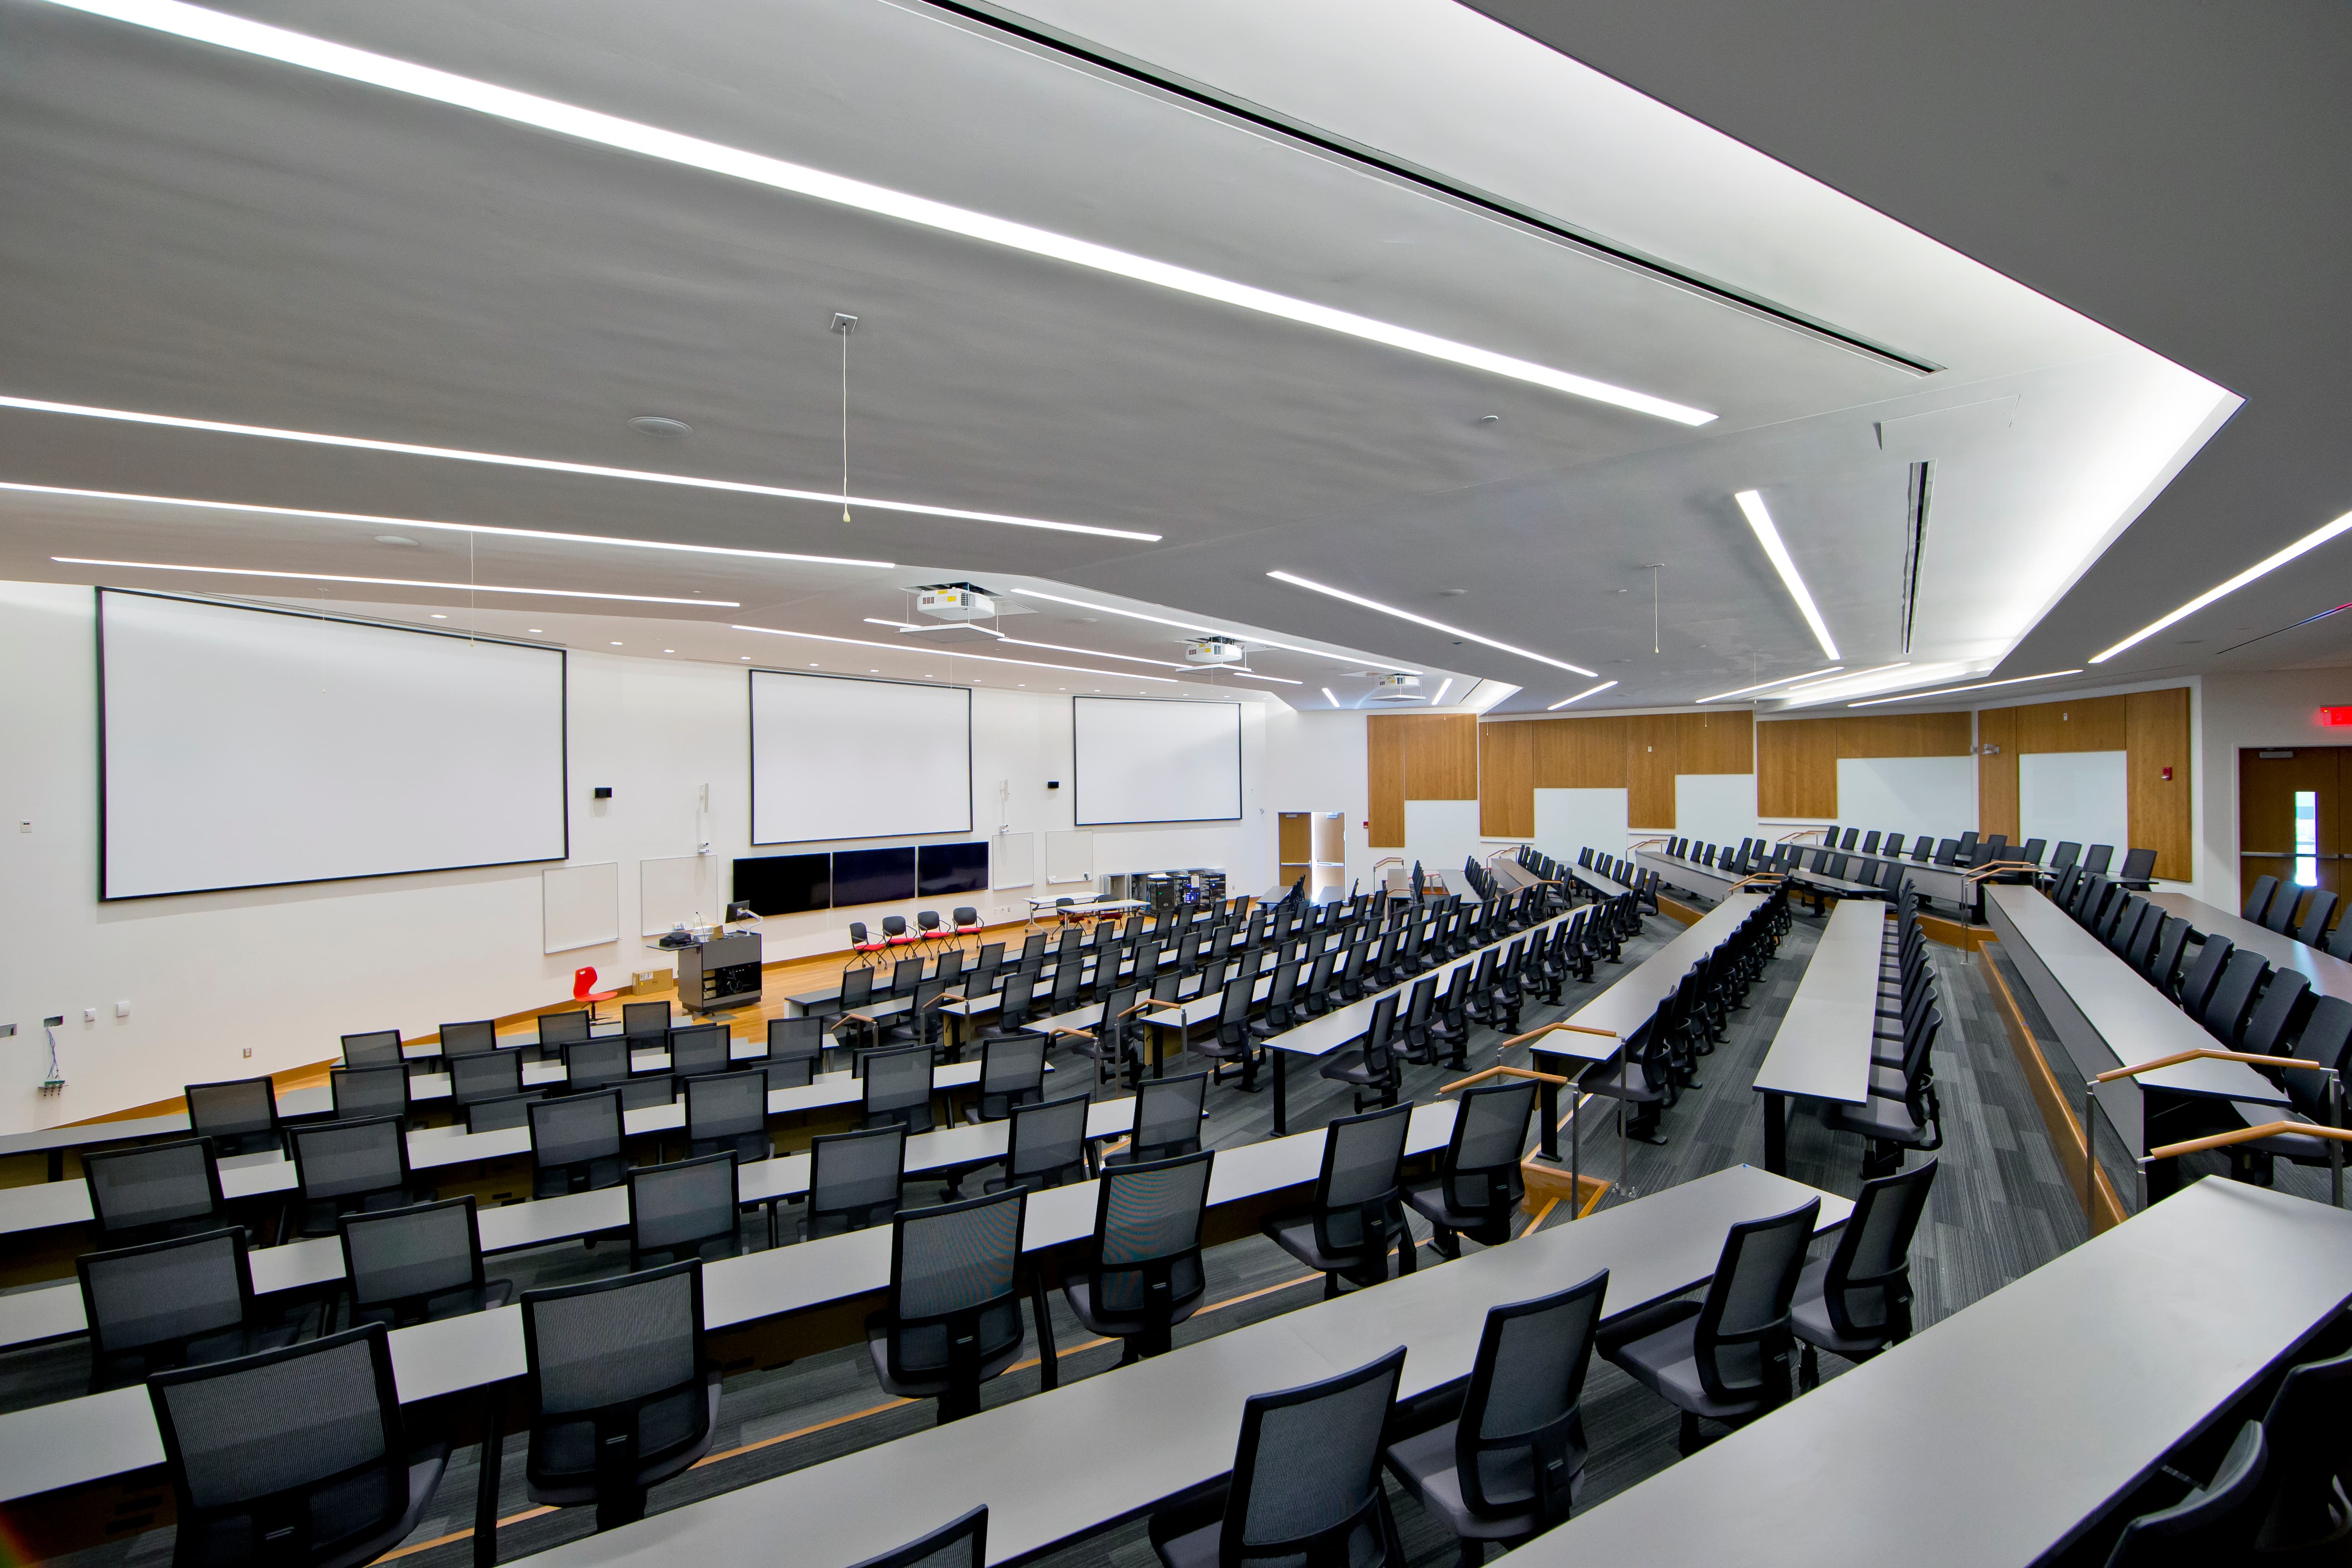 A large room with rows of long gray tables, each table with several black chairs positioned to face a wall of whiteboards.